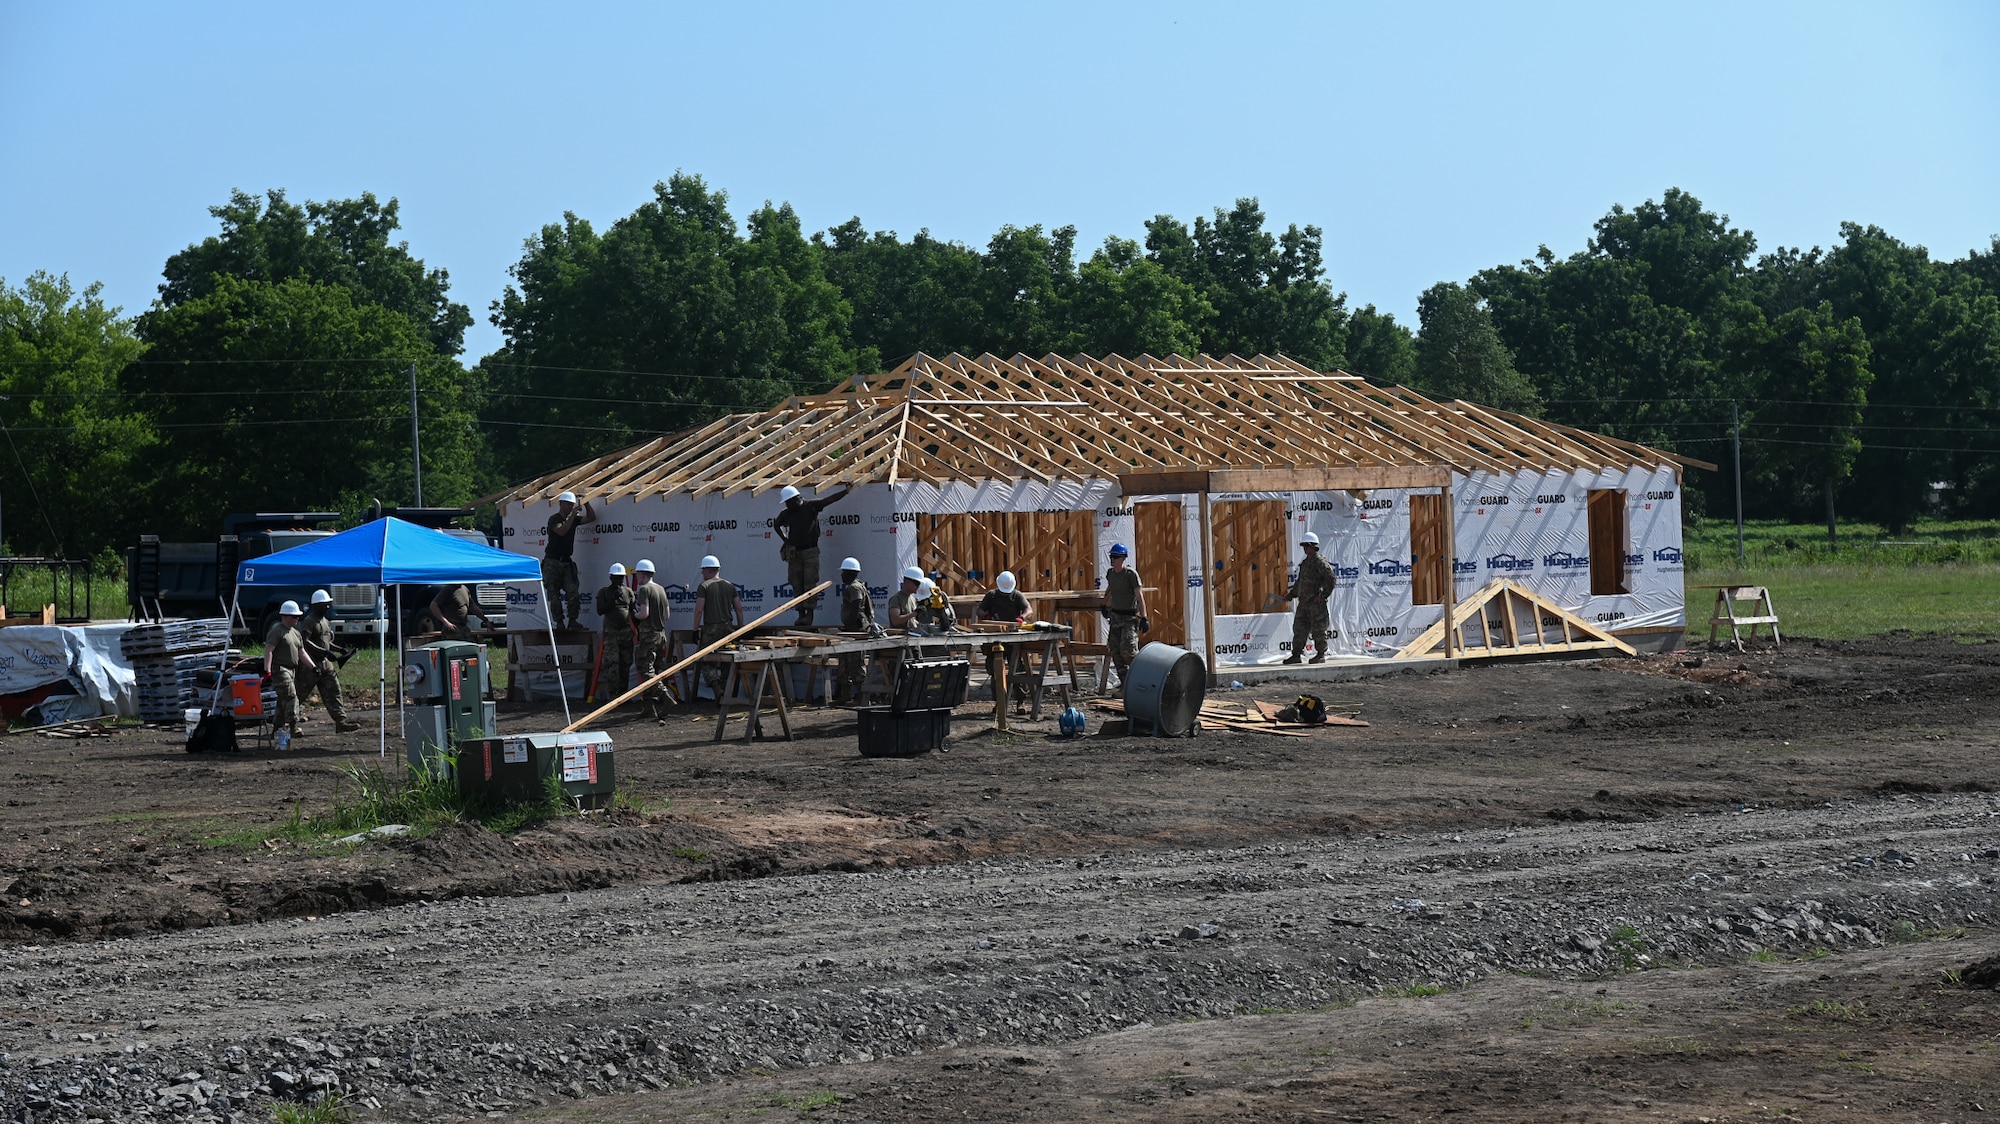 Members from the 175th Wing, Maryland Air National Guard along with the 123rd Airlift Wing, Kentucky Air National Guard, finish construction on a home built for  Cherokee Veterans in Tahlequah, Oklahoma, August 3, 2021, as part of the Defense Department’s Innovative Readiness Training program, or IRT. (U.S. Air National Guard photo by Senior Airman Danielle Lofton)